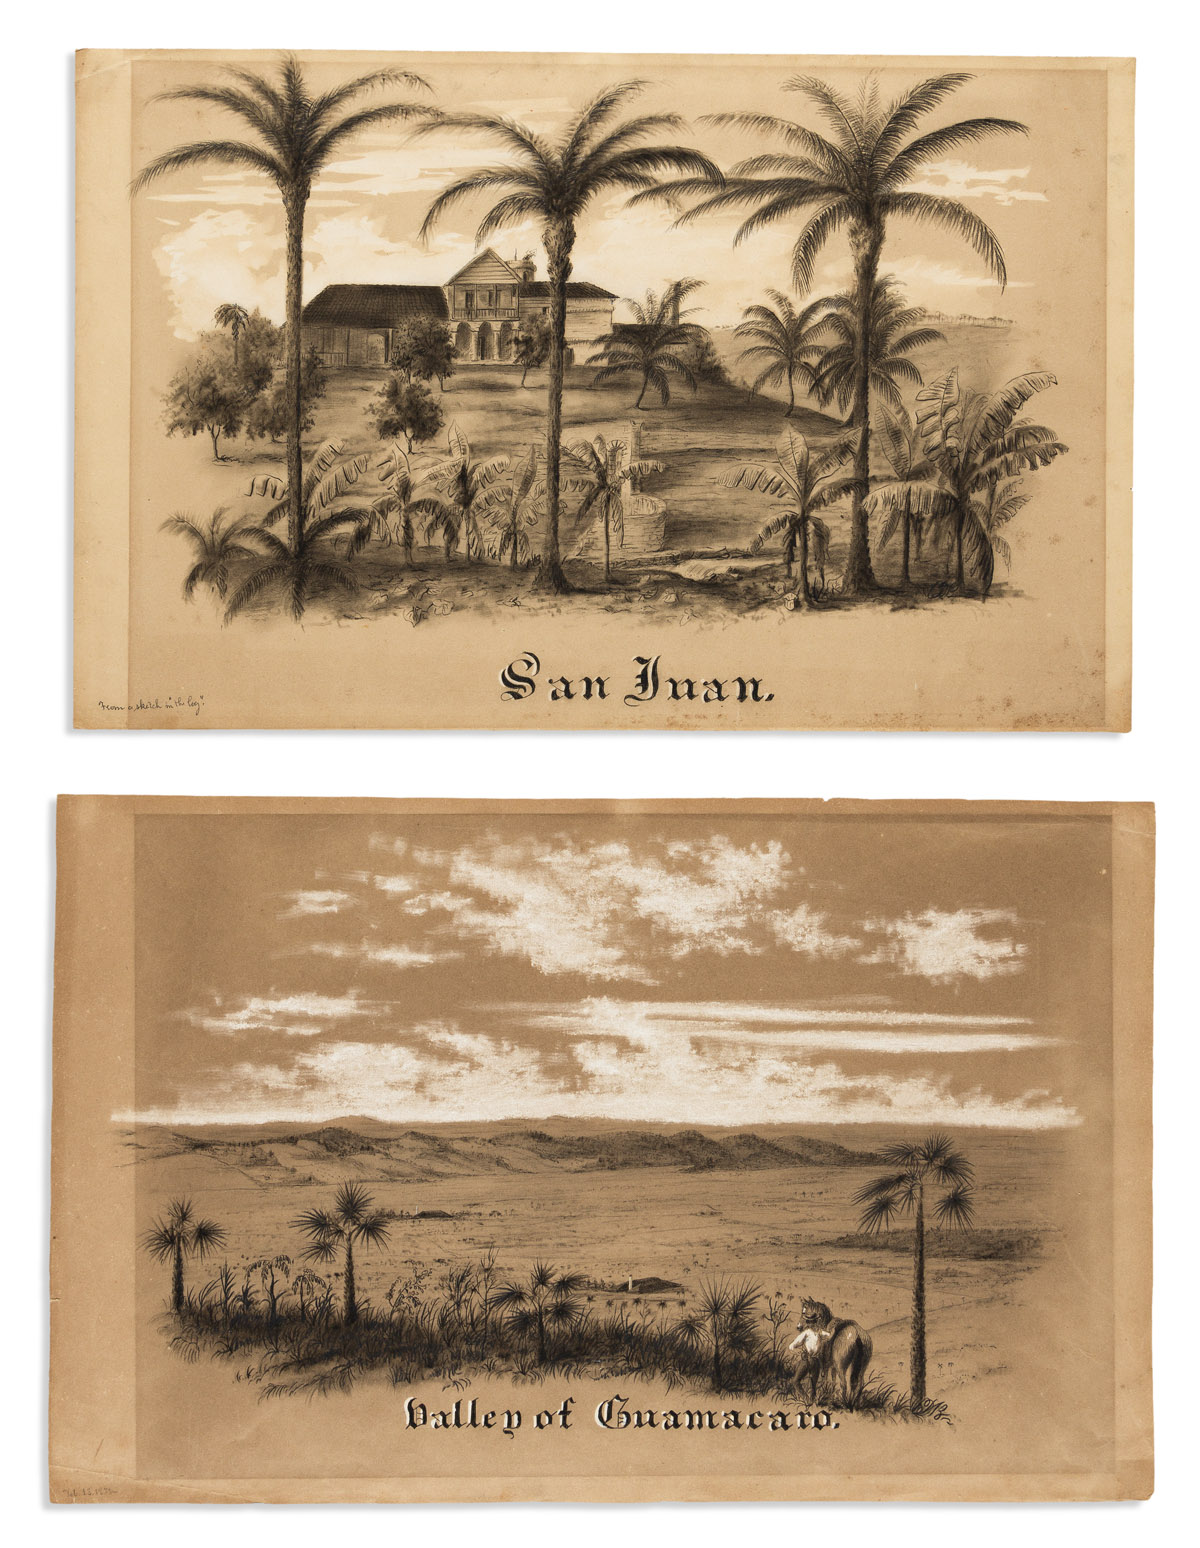 (CUBA.) Charles DeWolf Brownell. Two charcoal sketches heightened in white chalk: San Juan [and] Valley of Guamacaro.